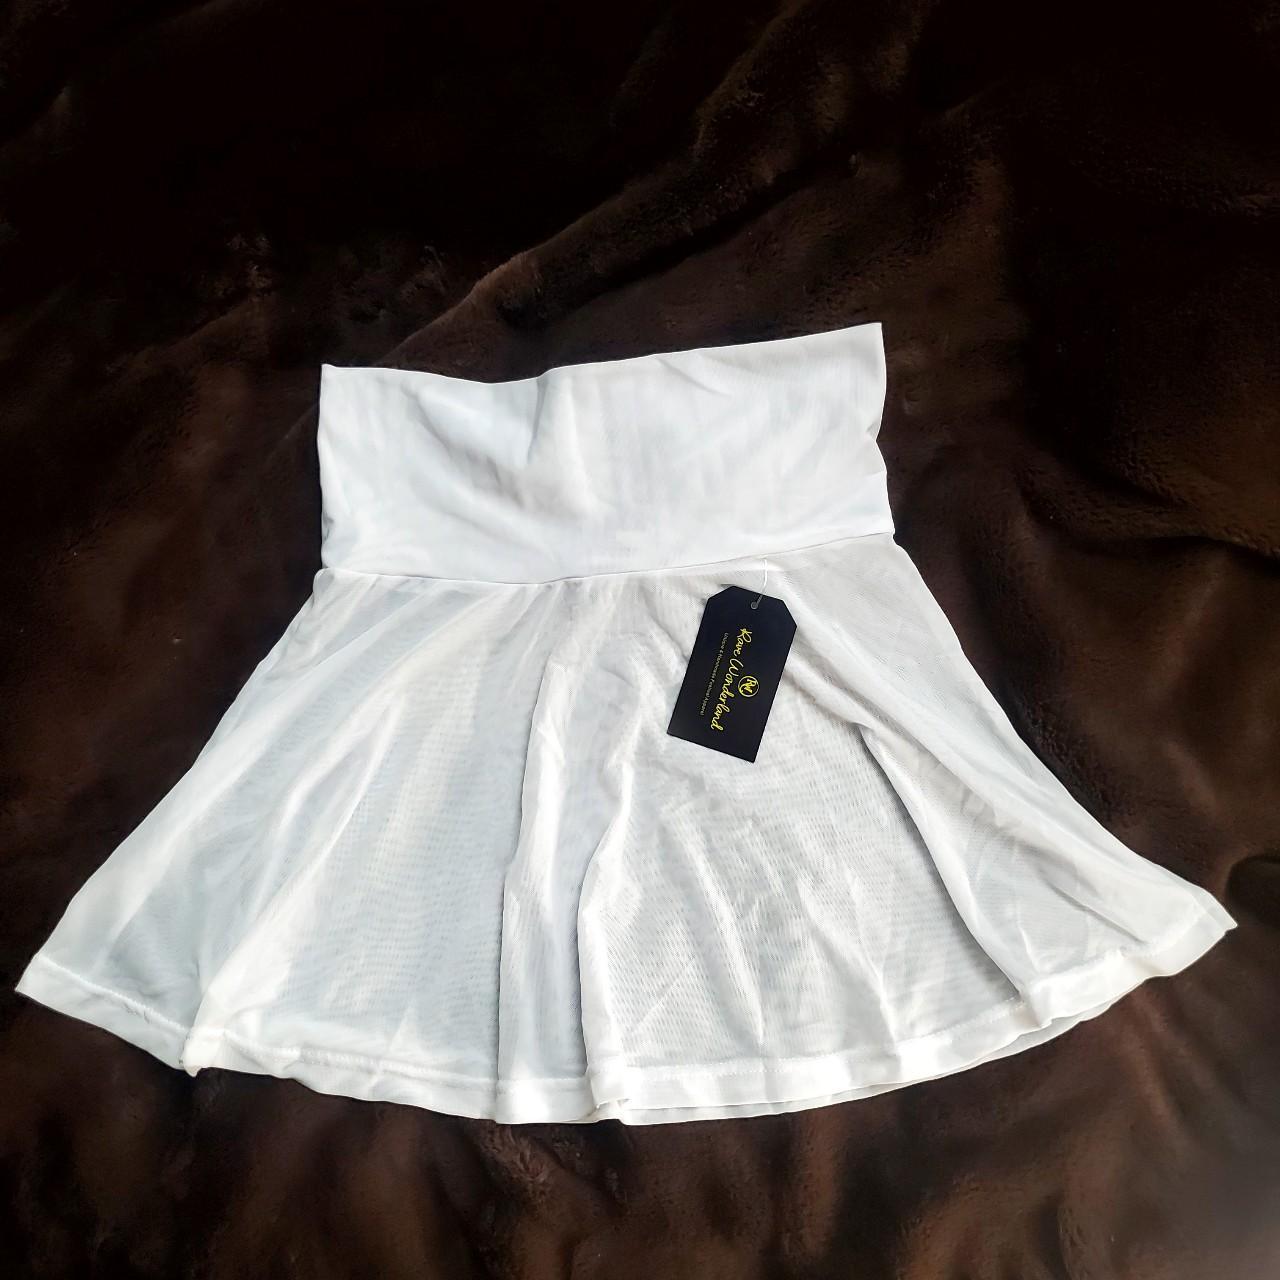 rave princess outfit + skirt *TOP IS SOLD* paid - Depop